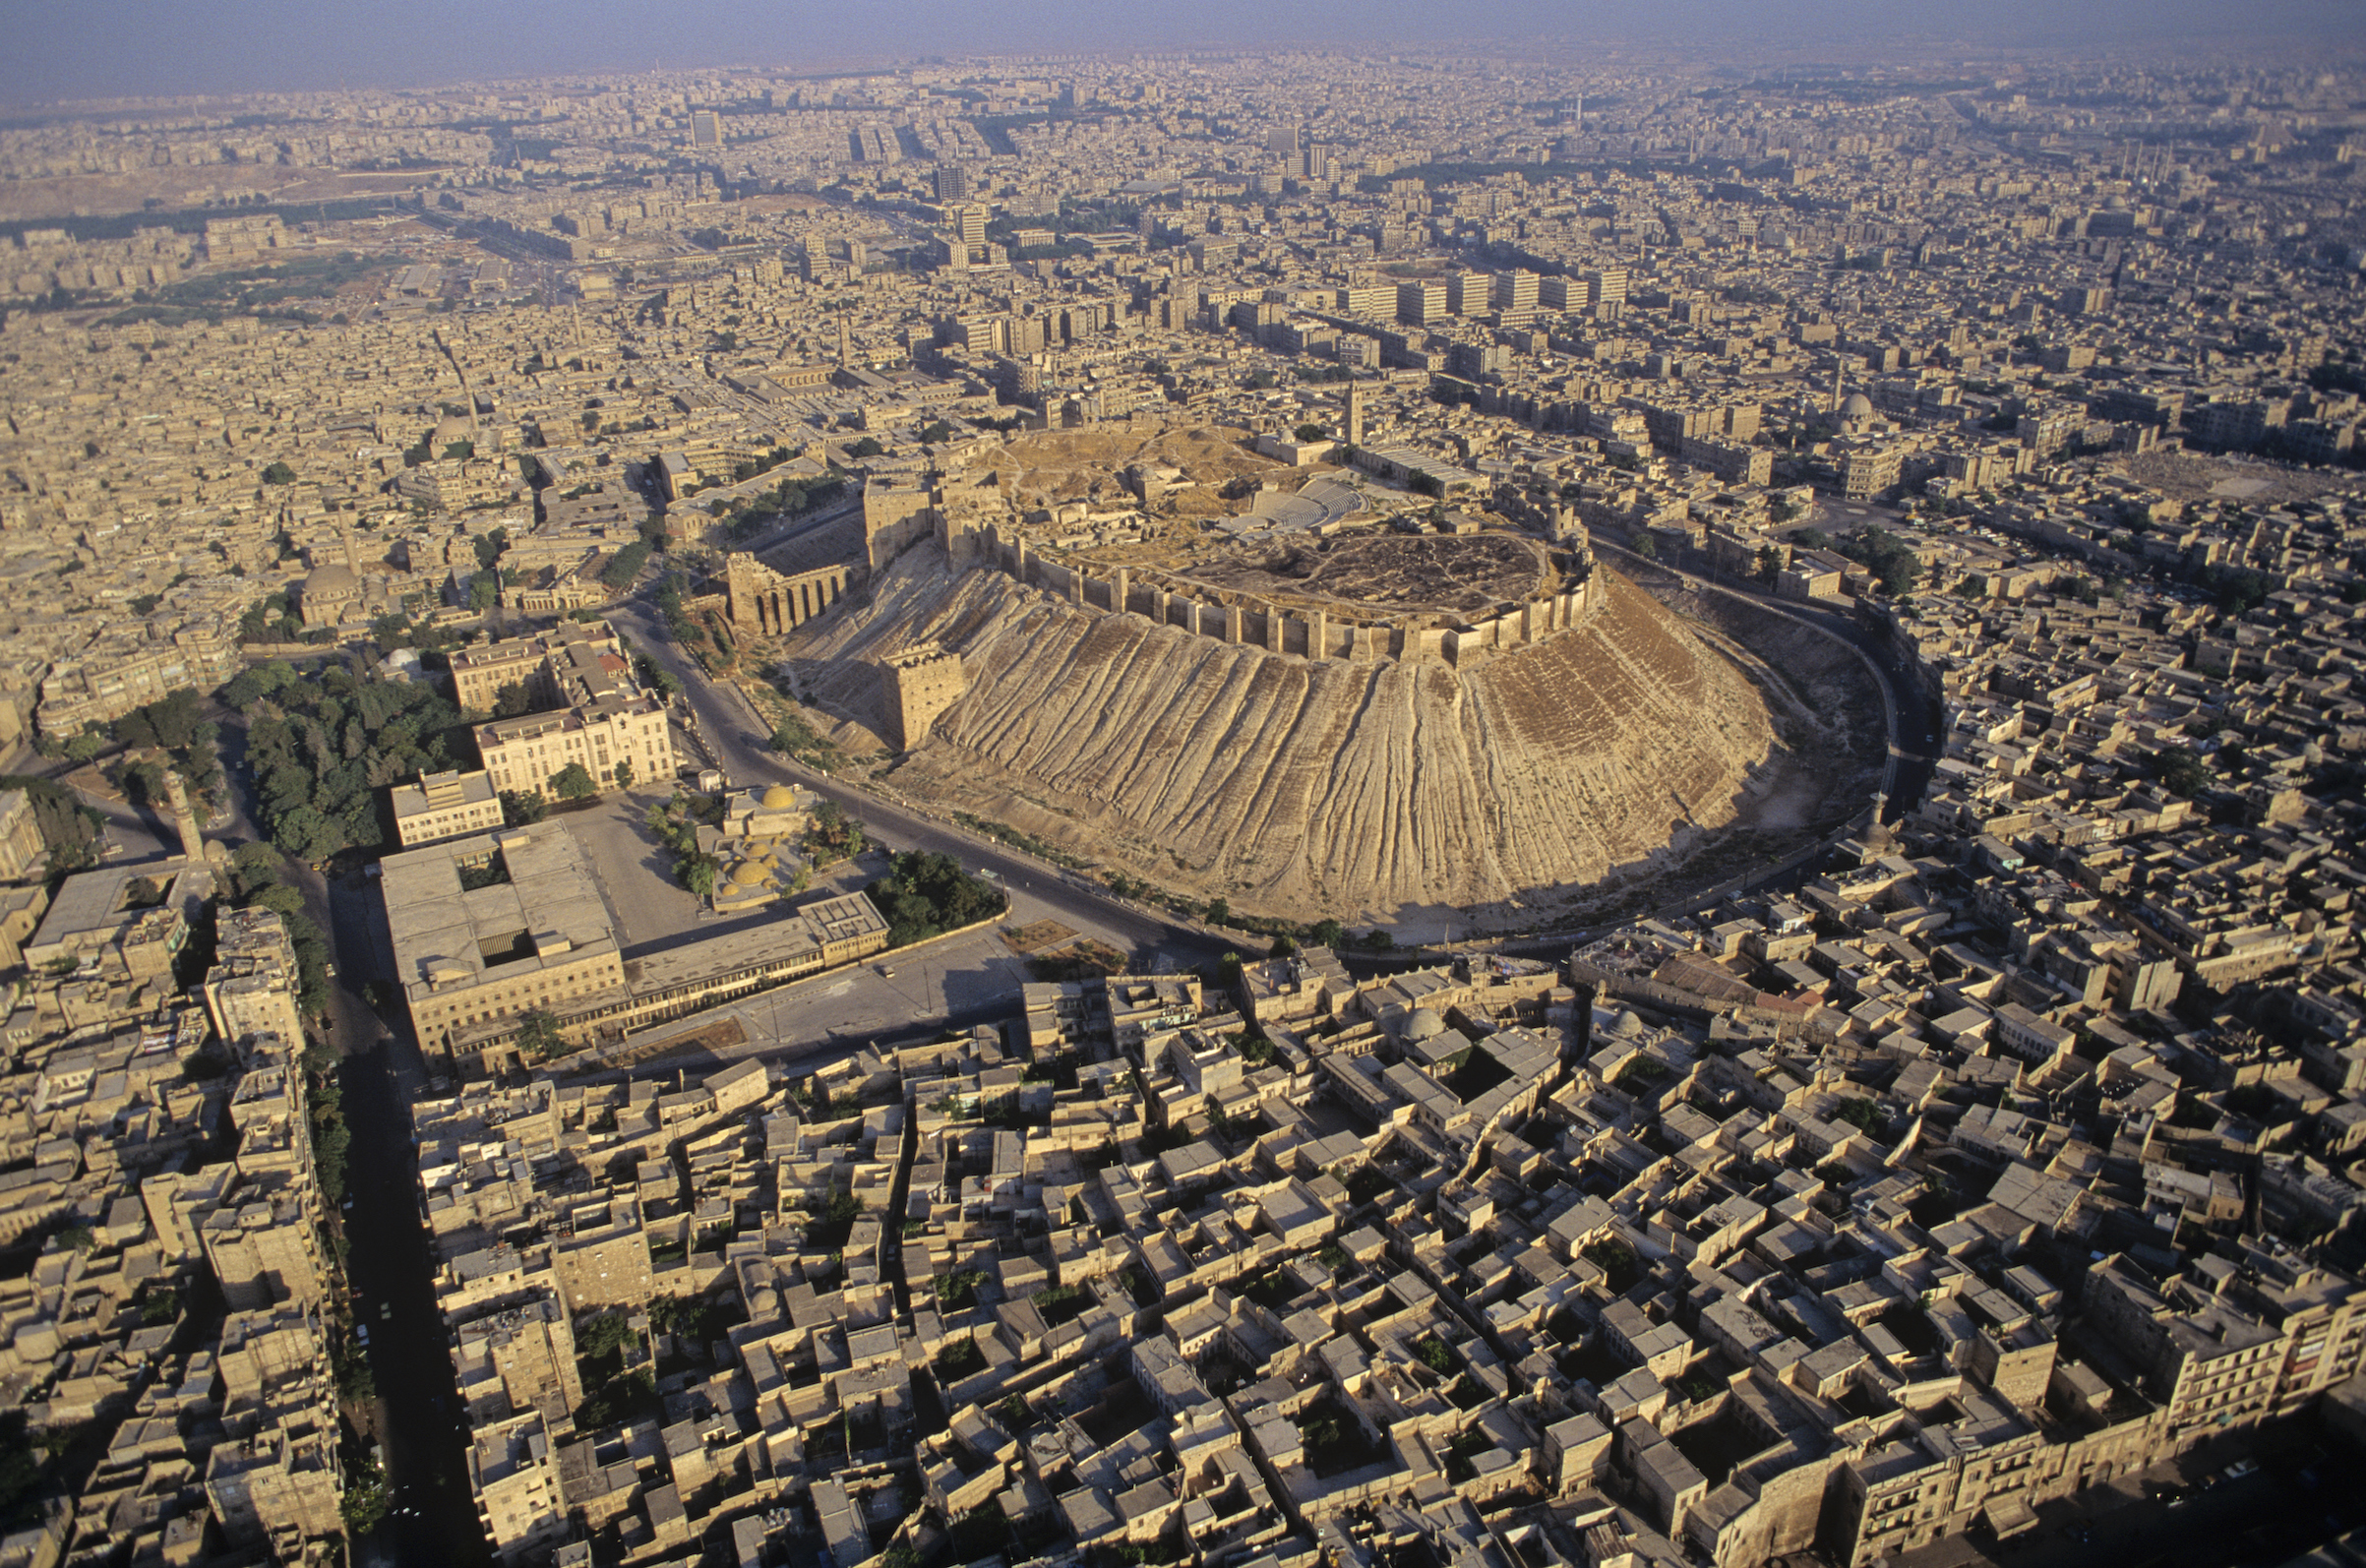 Aerial view of the citadel in the ancient city of Aleppo, Syria (Sygma/Getty Images)